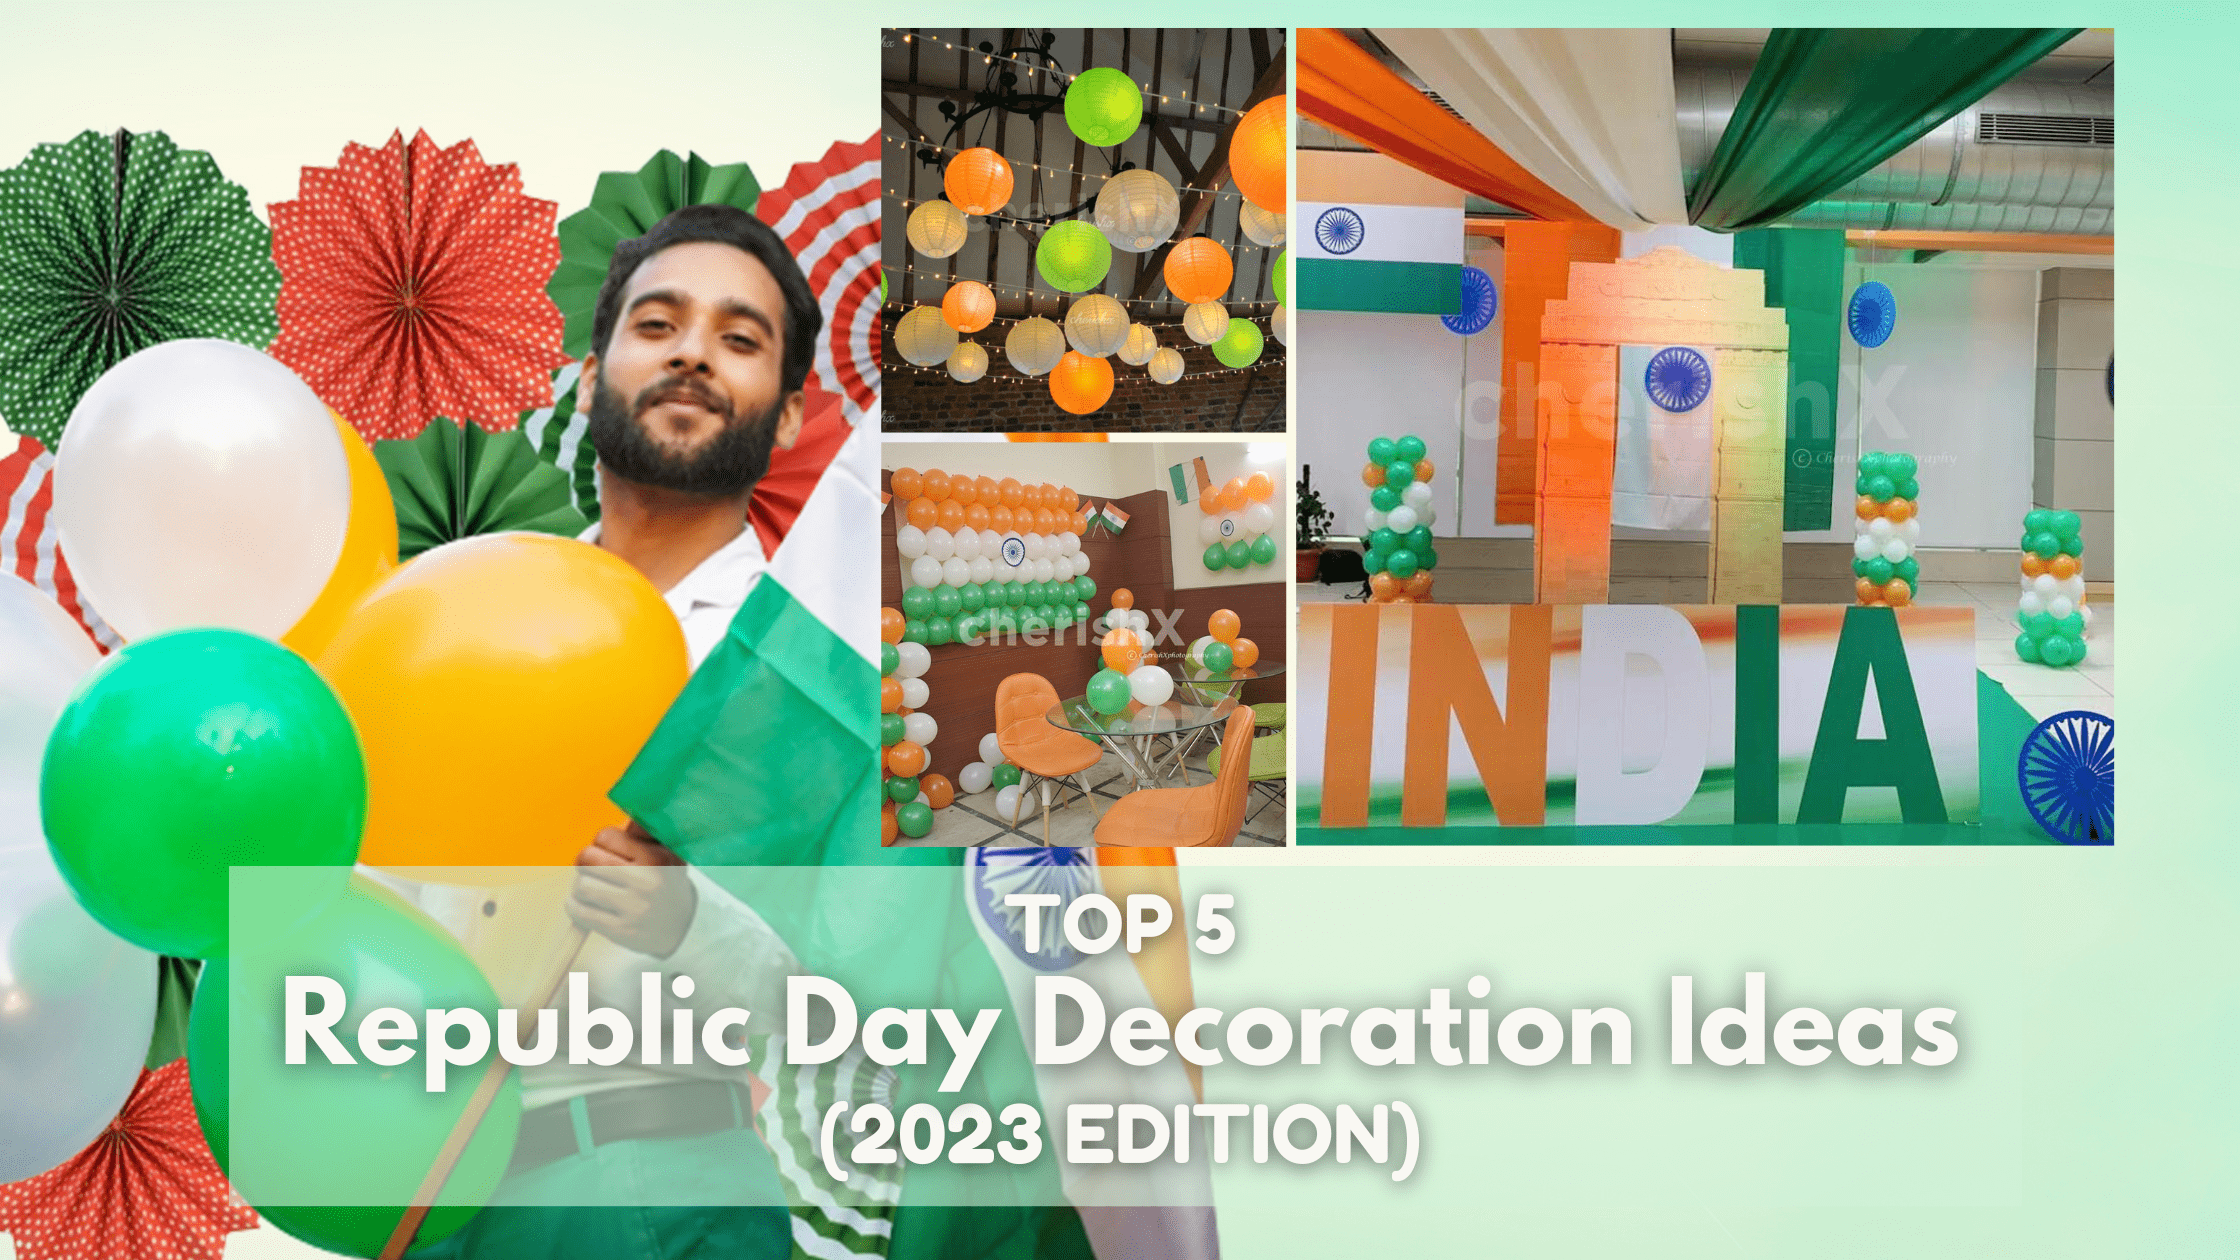 Top 5 Republic Day Decoration Ideas to celebrate the nation with Pride- 2023 Edition